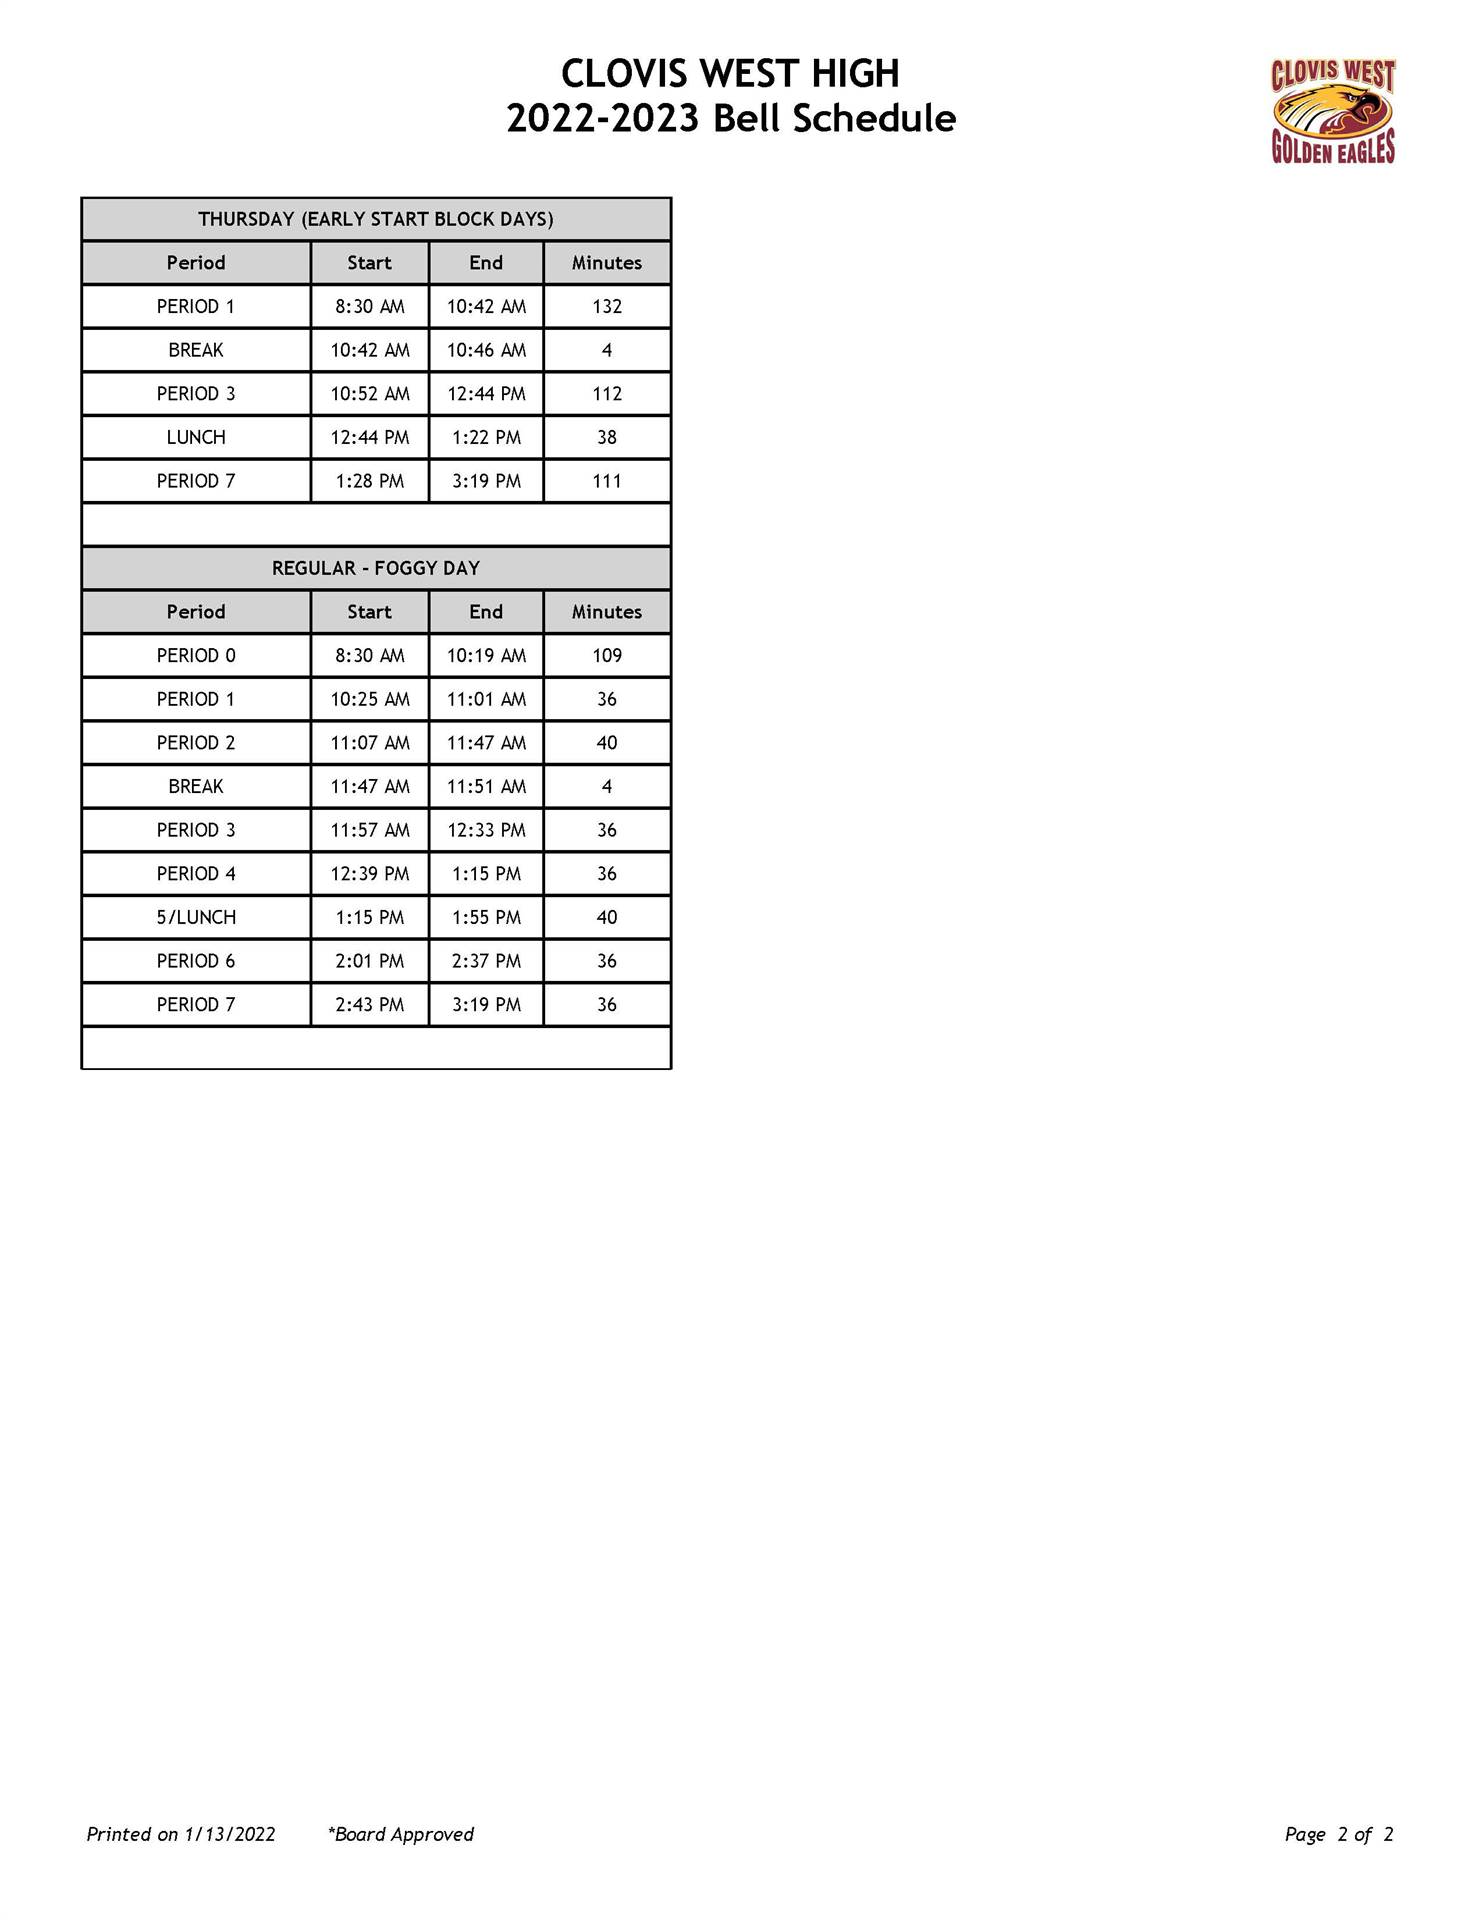 CWHS Area Bell Schedule - full text downloadable below